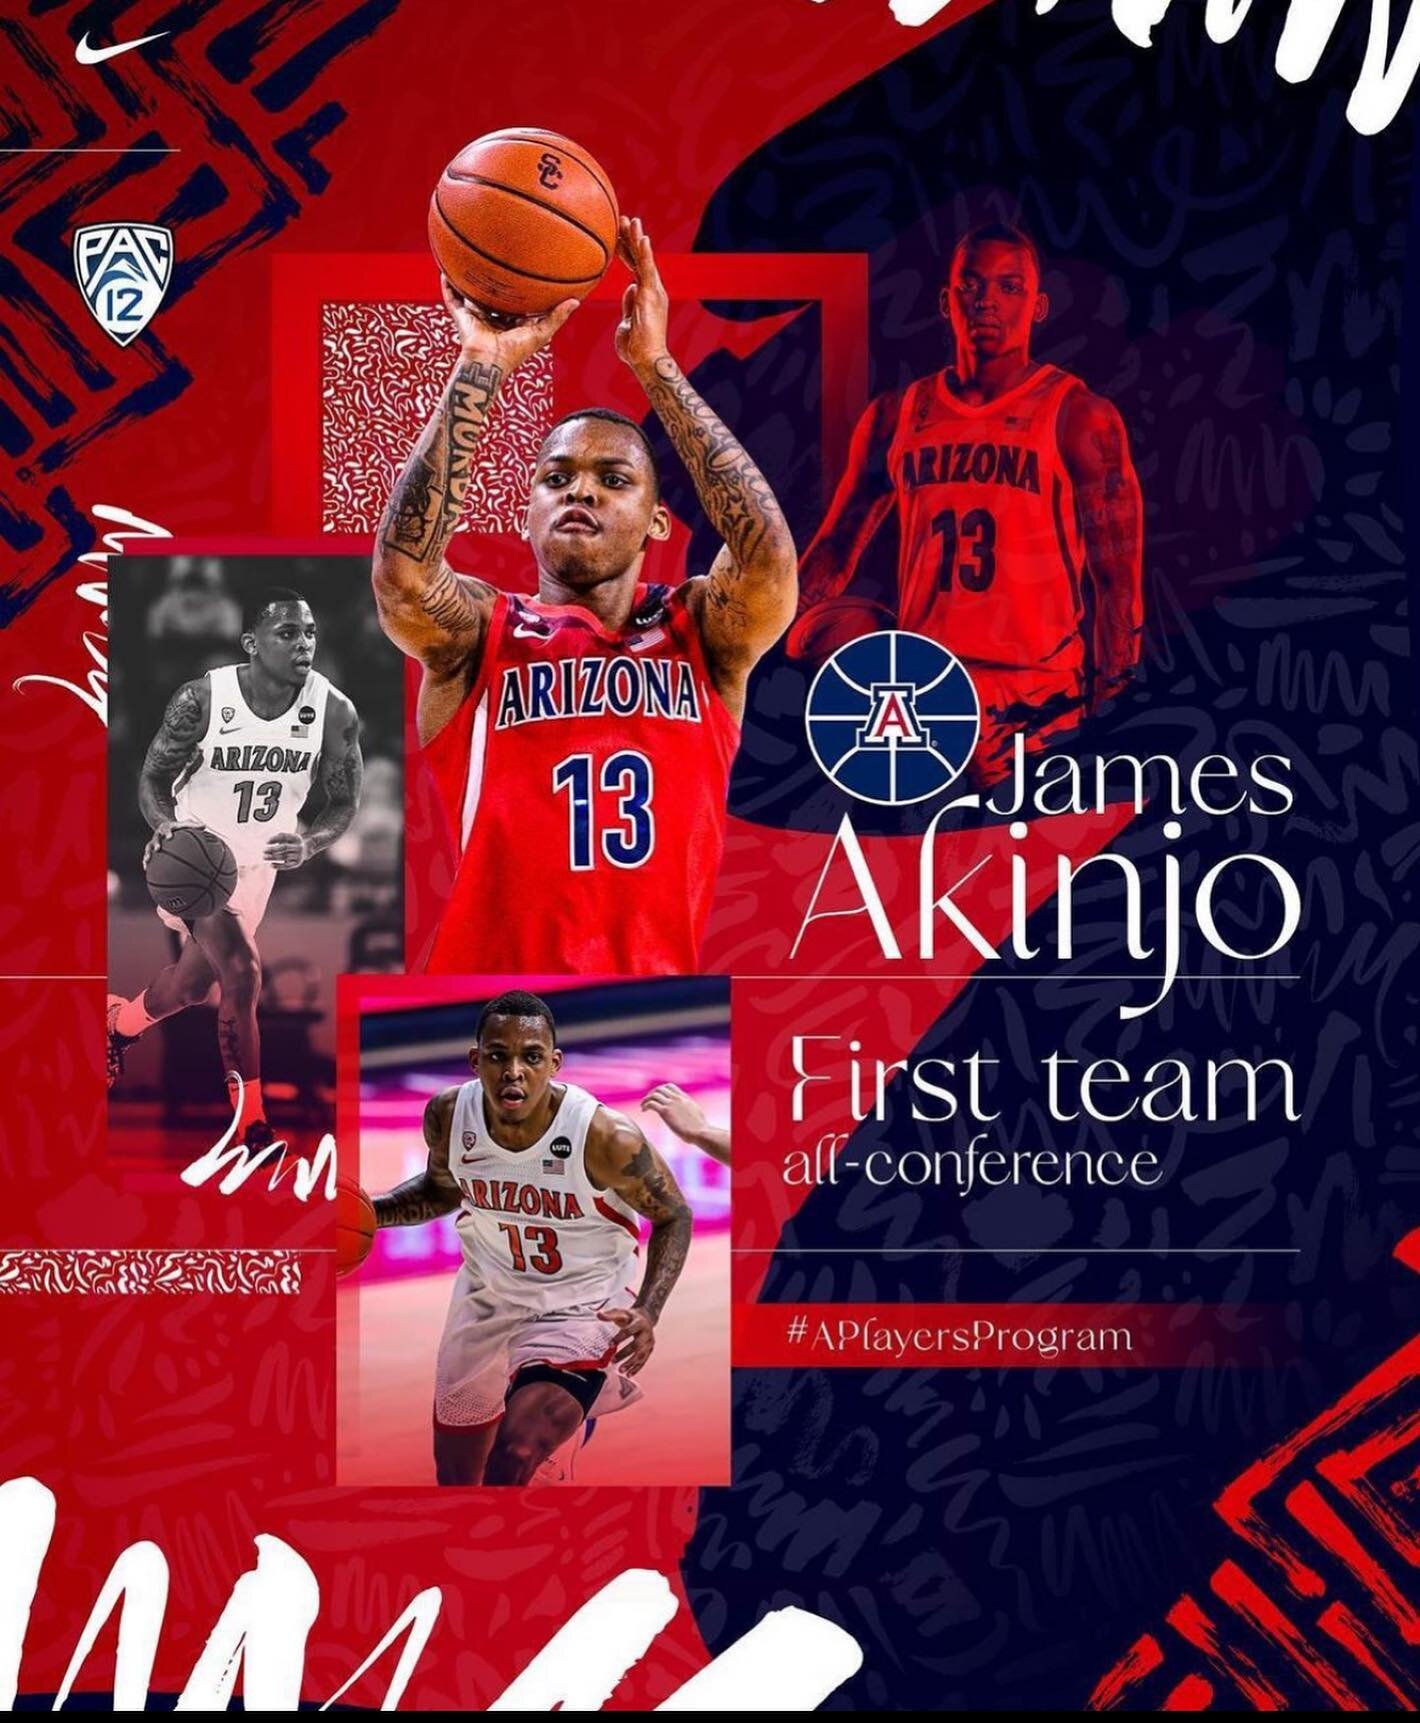 Congrats to soldier alum @akinjojames3 on earning first team all @pac12conference and leading the conference in assists!!!
#soldierbasketball#Thefraternity#salute